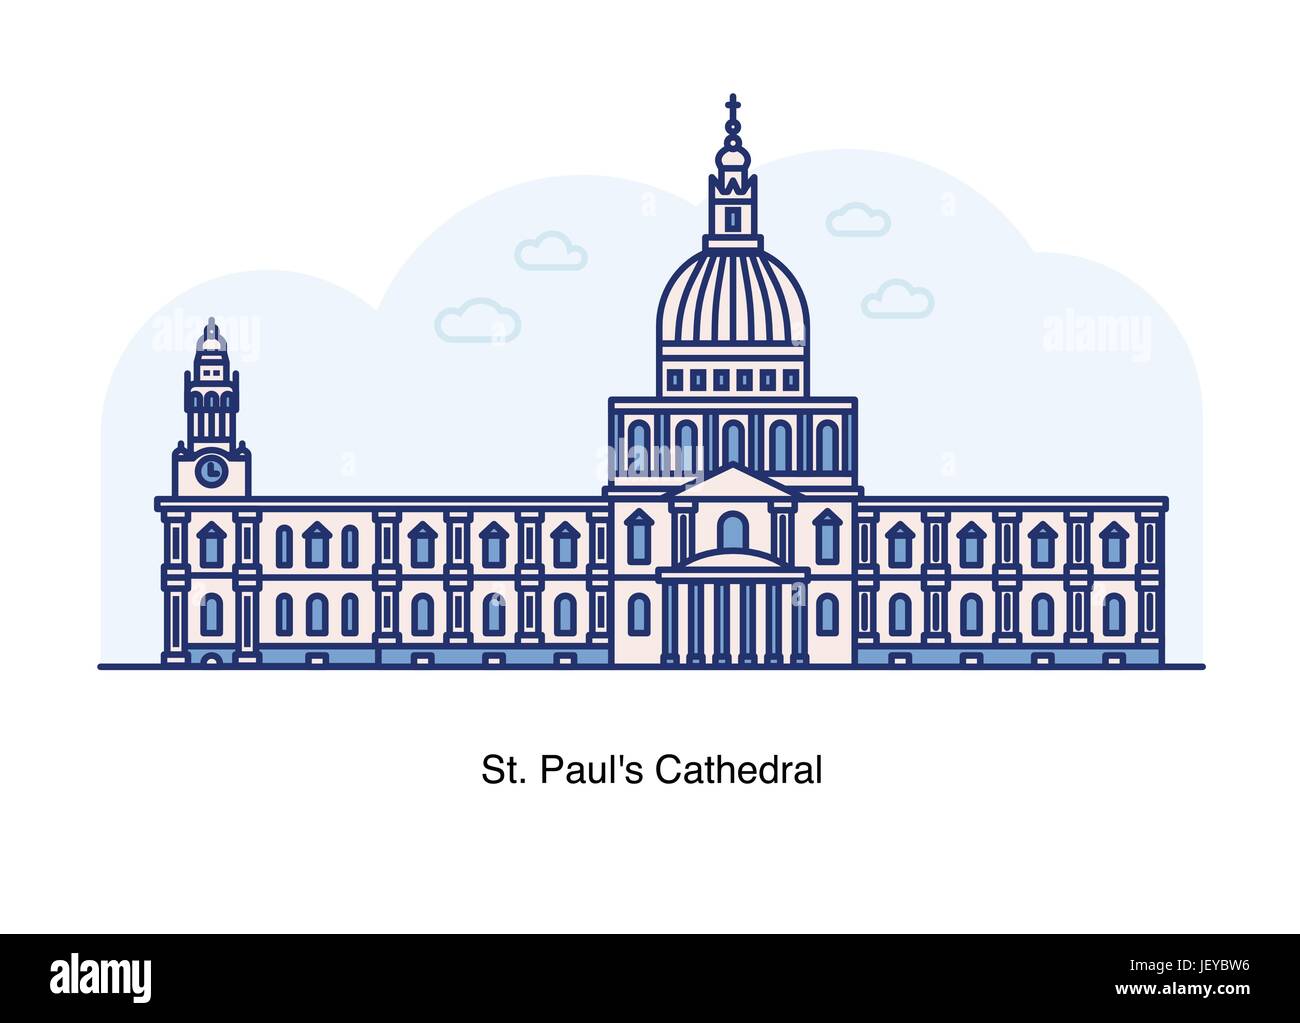 Vector line illustration of St Paul's Cathedral, London, England Stock Vector